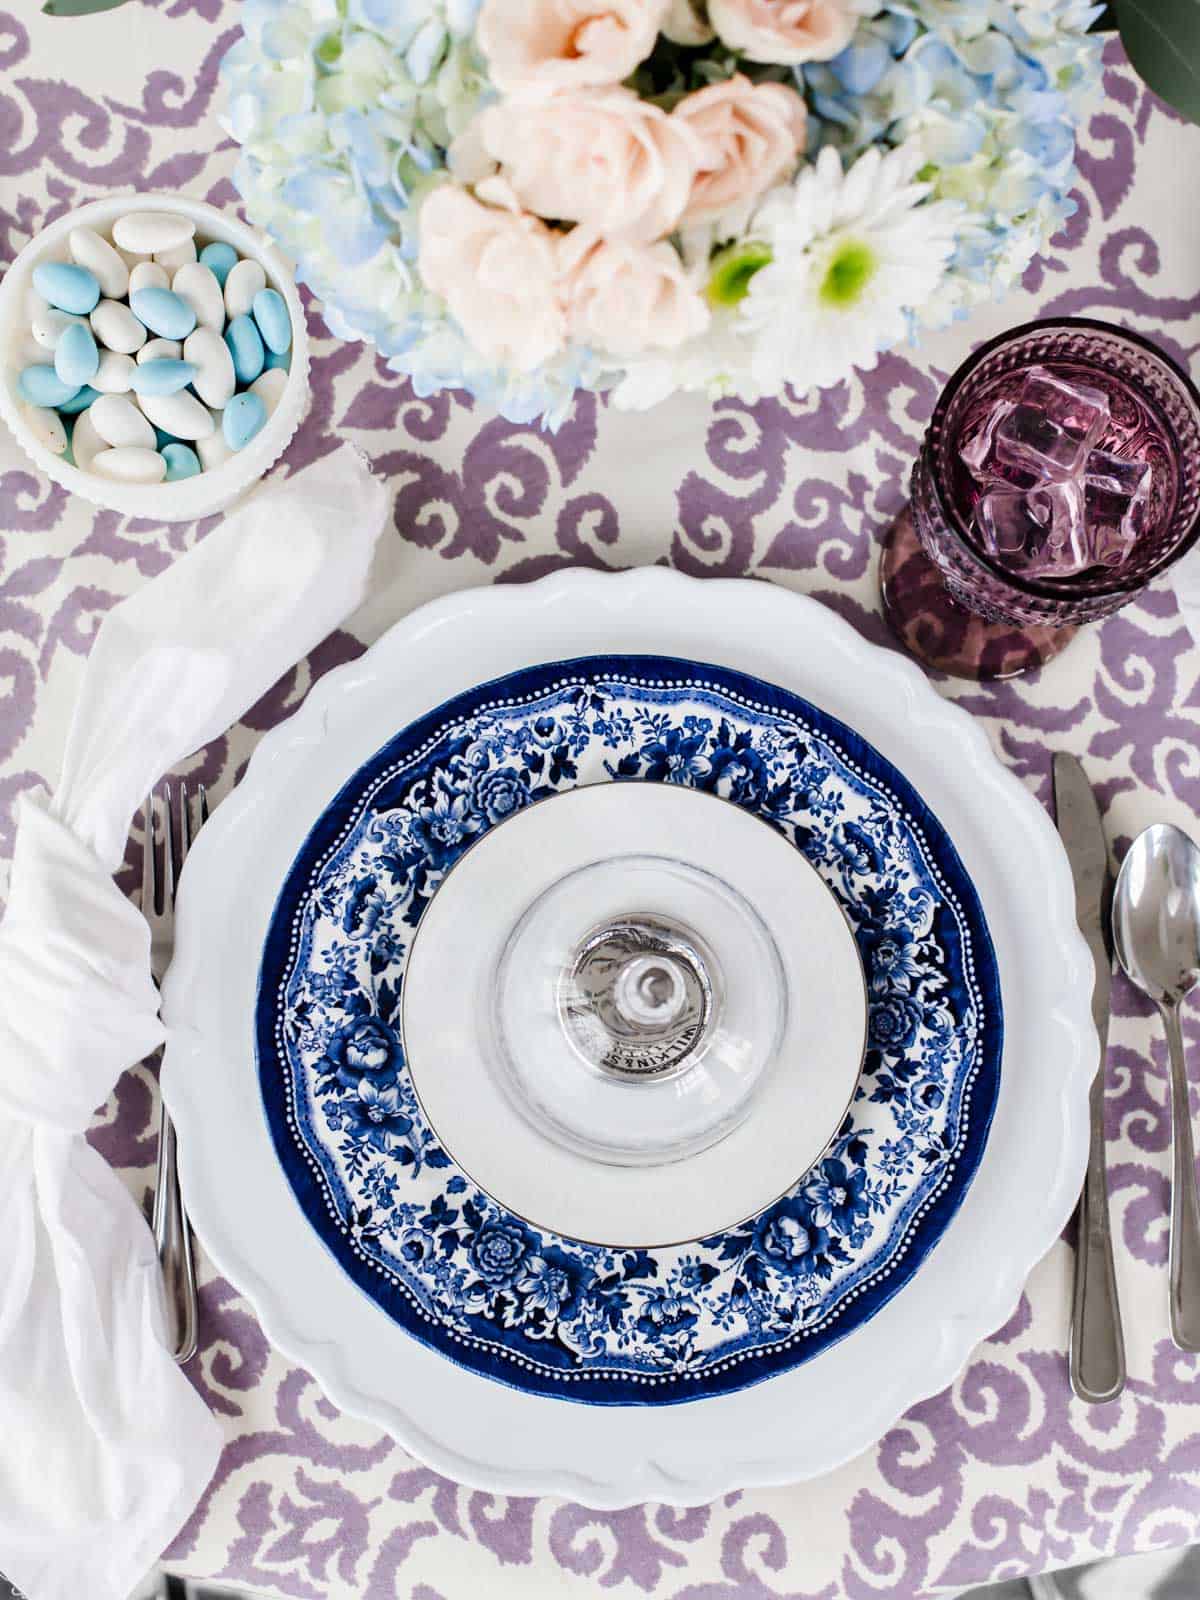 table setting with layered Blue Willow dinner plate and white salad plate on white charger, on purple print tablecloth.